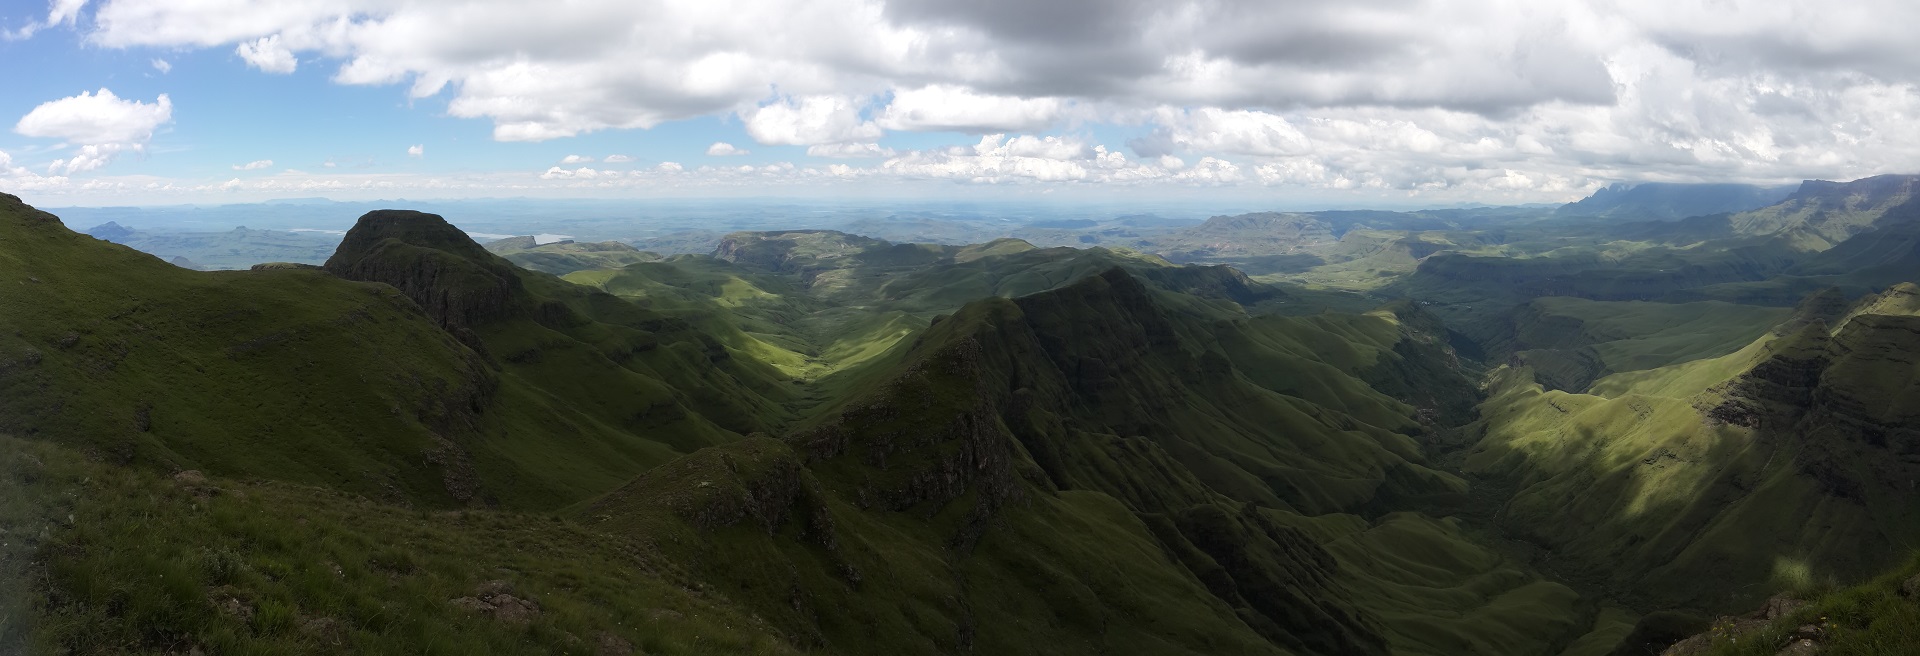 A panorama from the highest place. The starting point is the small white dot at the end of the big ridge that goes to up right from the center of the picture.